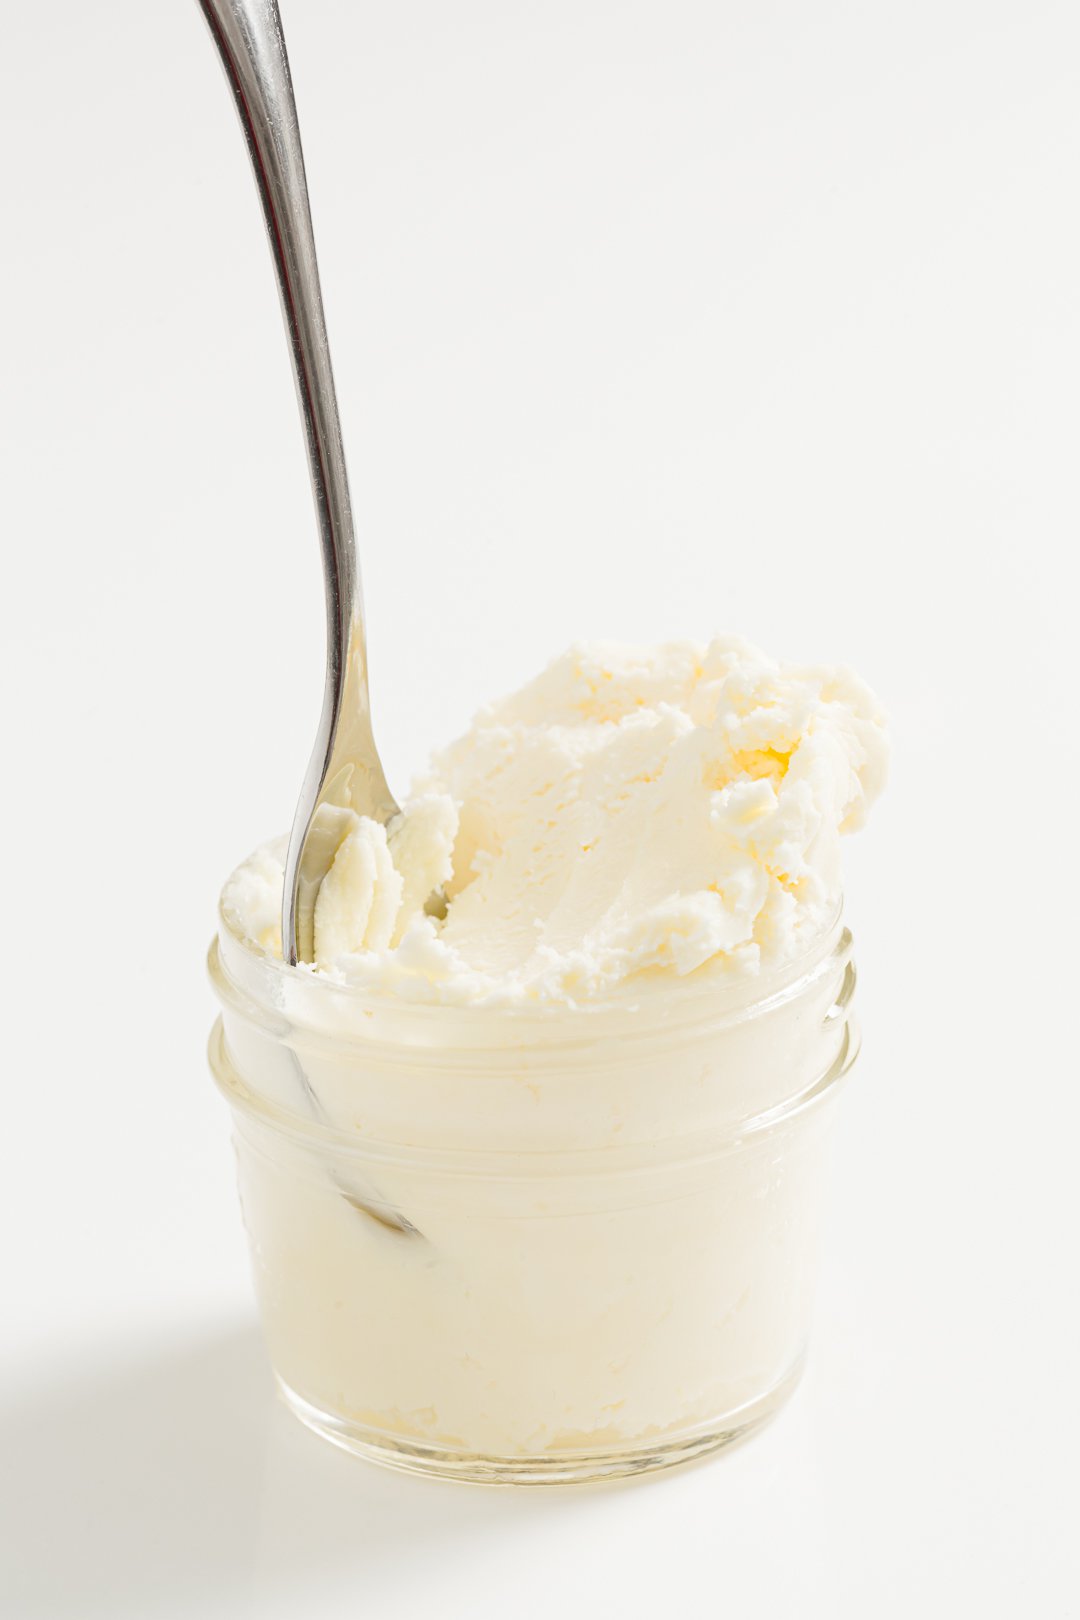 A jar of clotted cream with a spoon resting inside